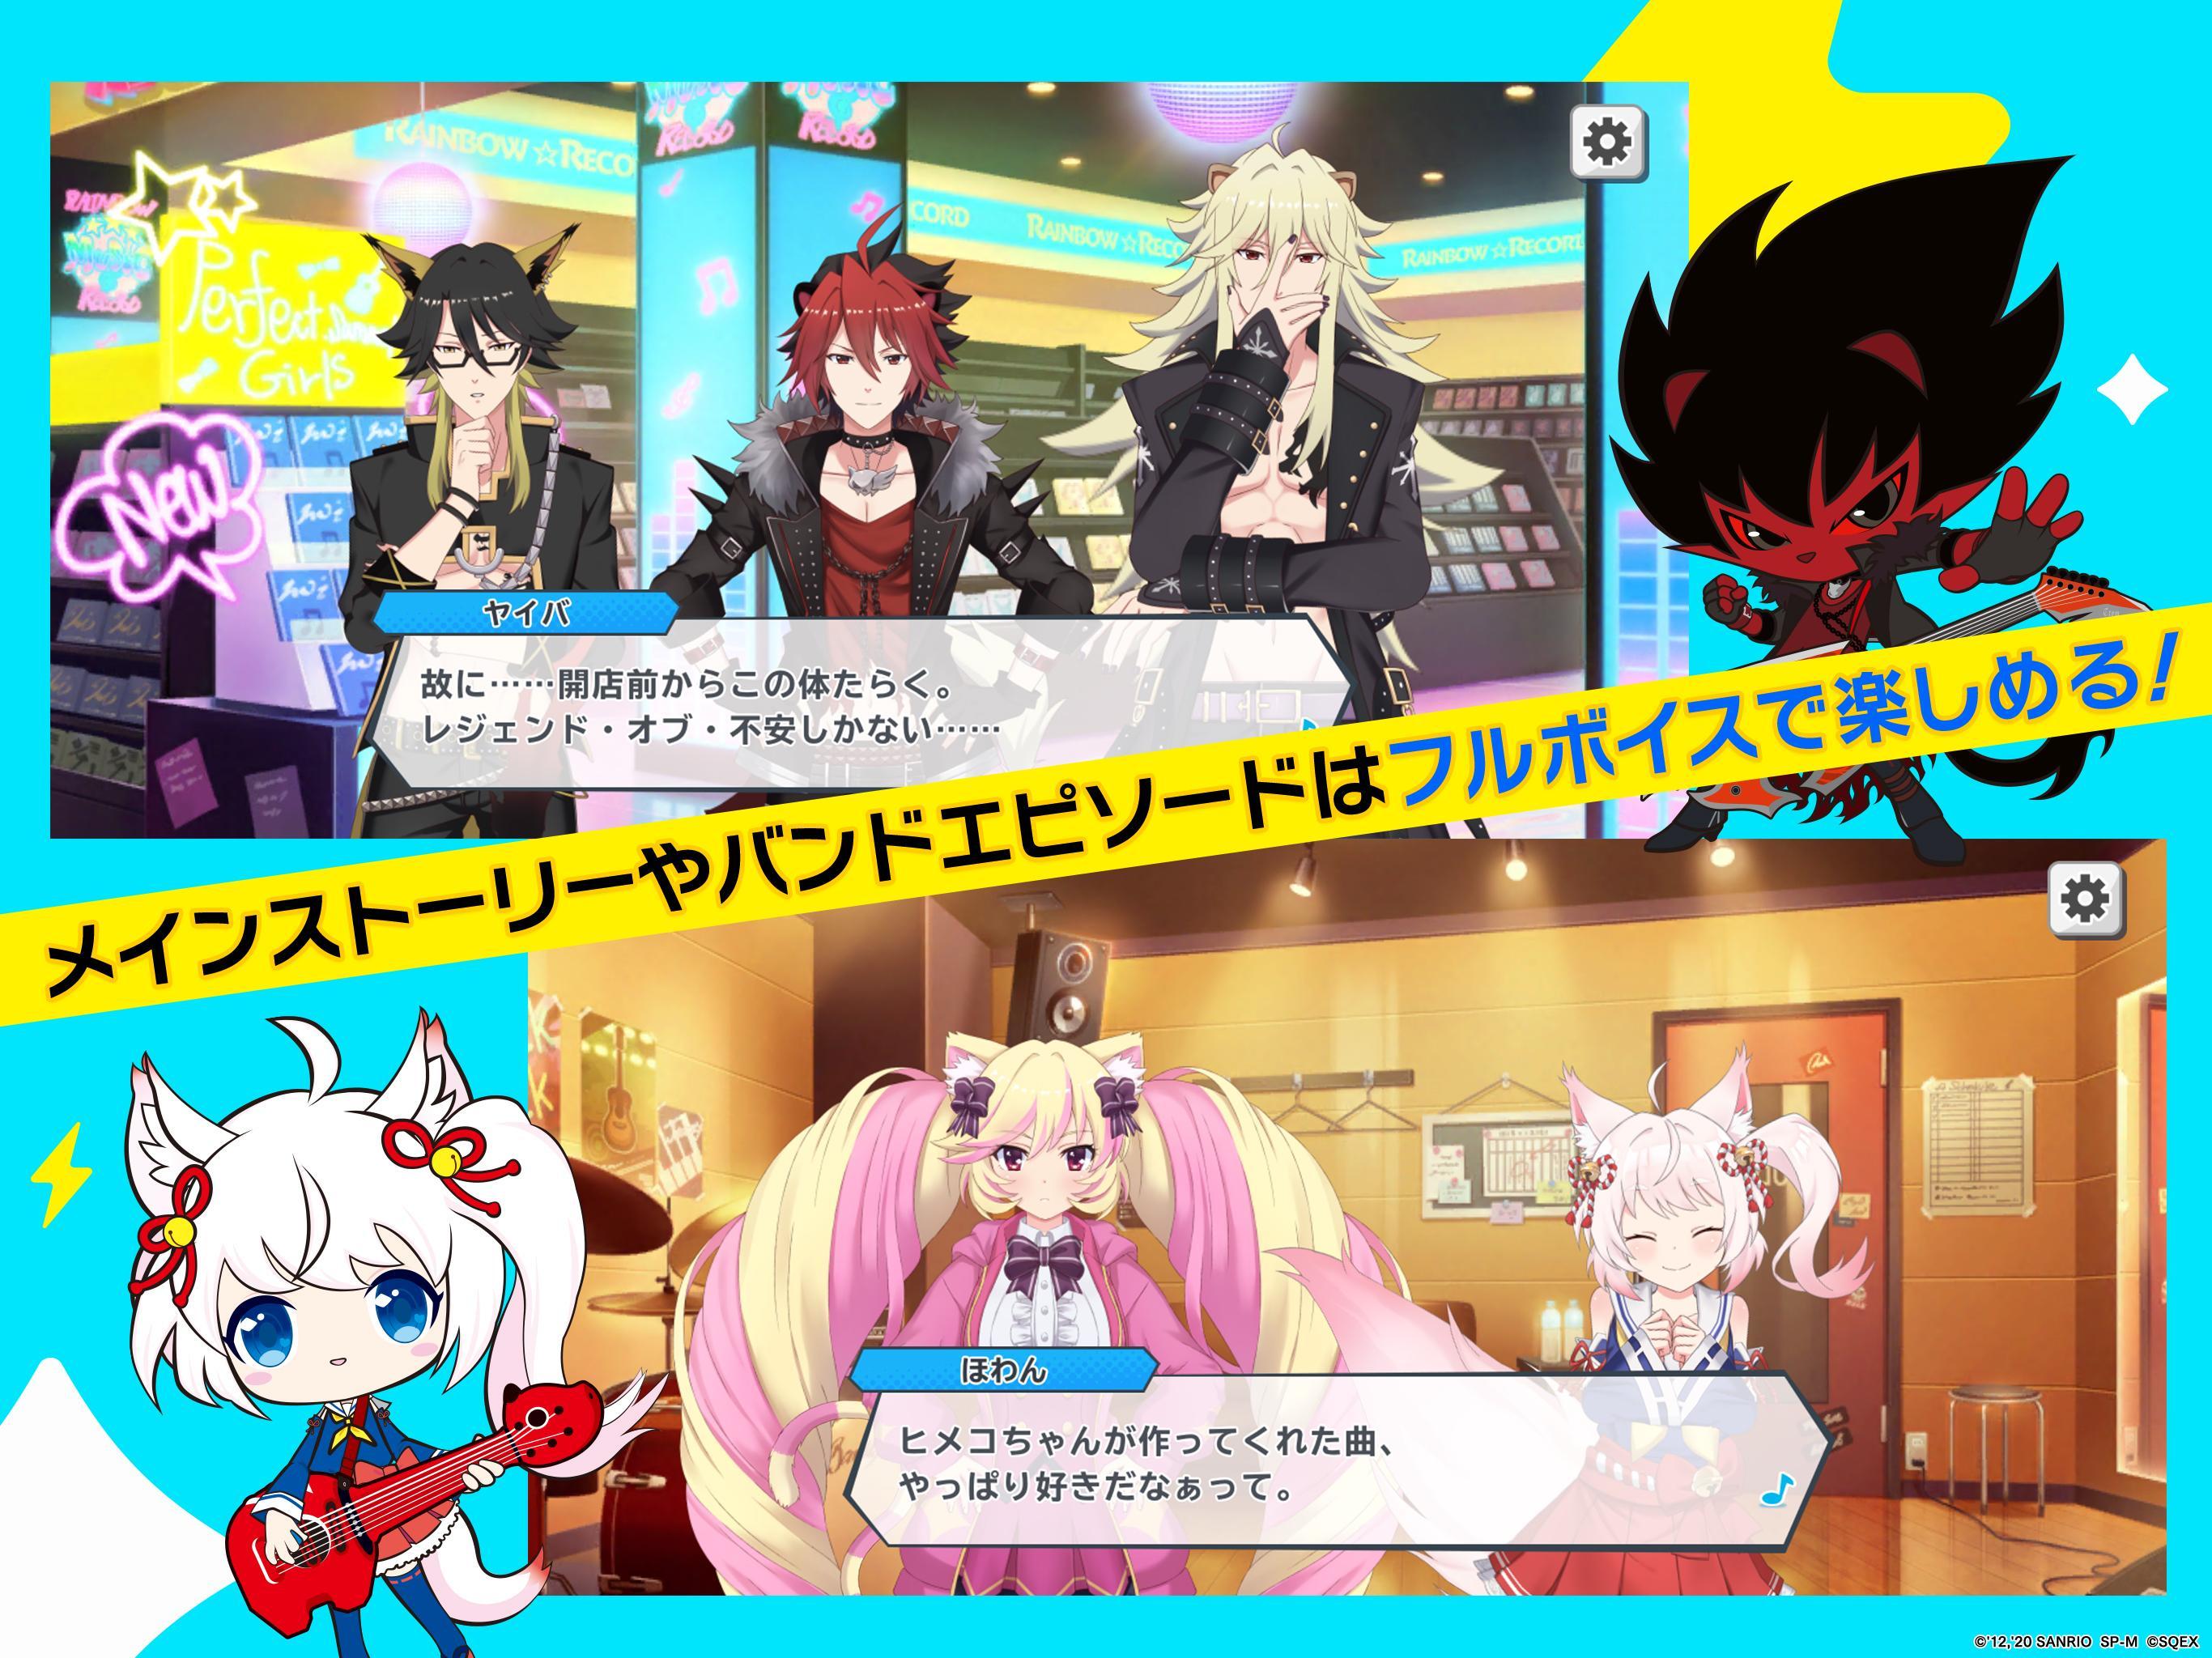 SHOW BY ROCK!! Fes A Live - APK Download for Android